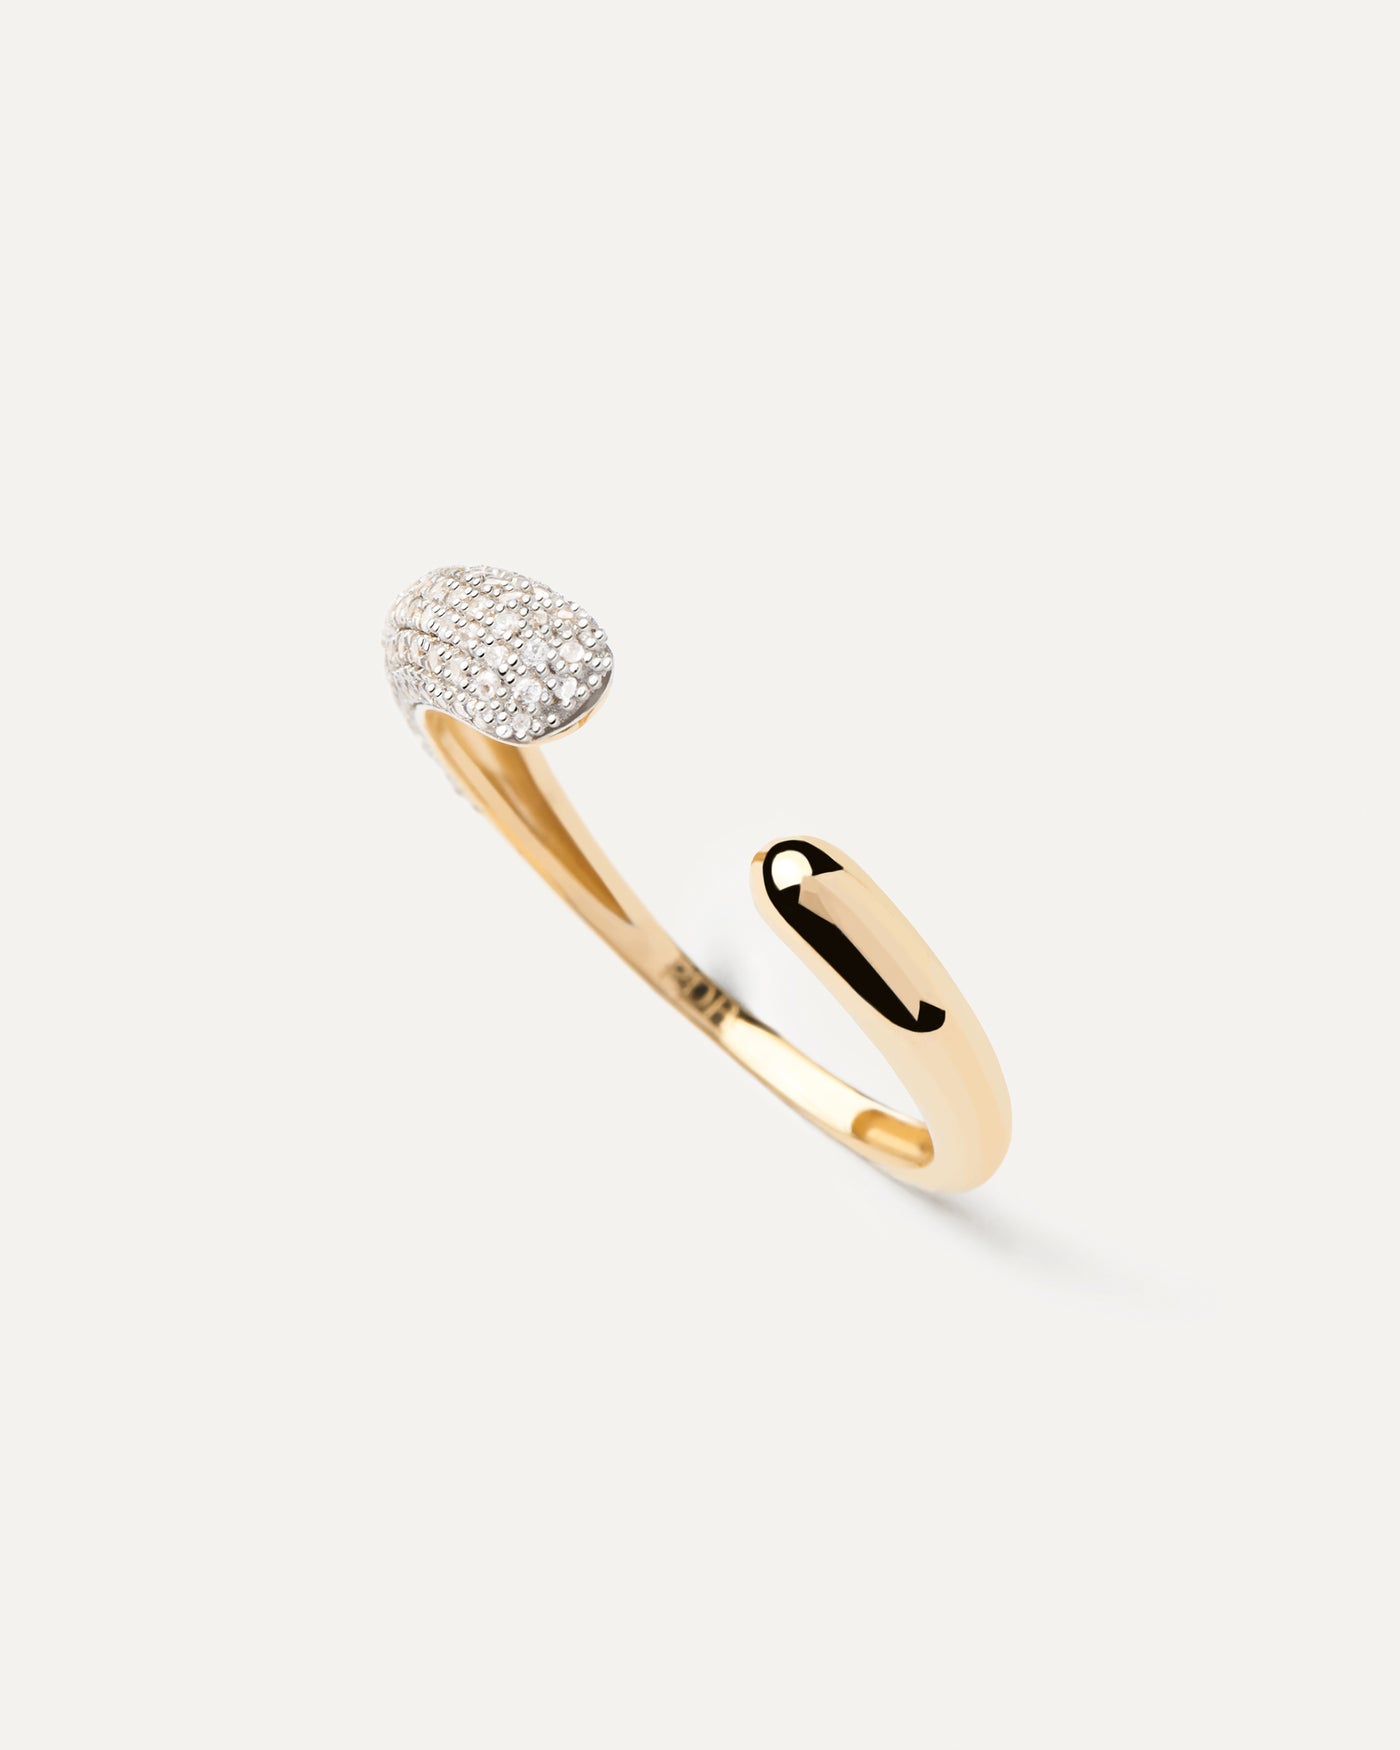 2023 Selection | Diamonds and Gold Soho Ring. Open band ring in solid yellow gold set with pavé diamonds of 0.3 carats and rounded edges. Get the latest arrival from PDPAOLA. Place your order safely and get this Best Seller. Free Shipping.